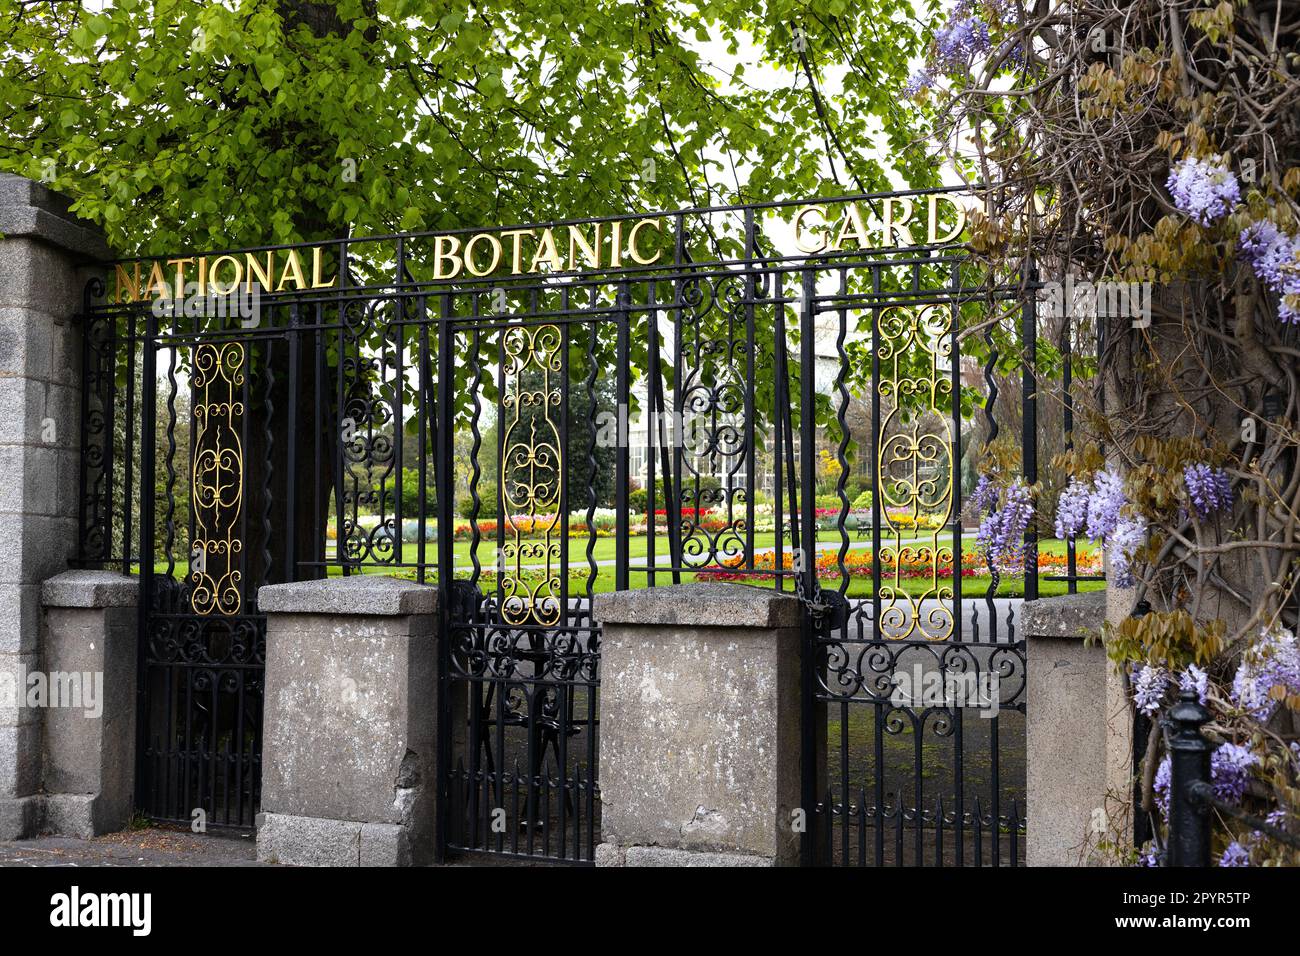 Sign and fence at the entrance to the National Botanic Gardens in Dublin, Ireland. Stock Photo